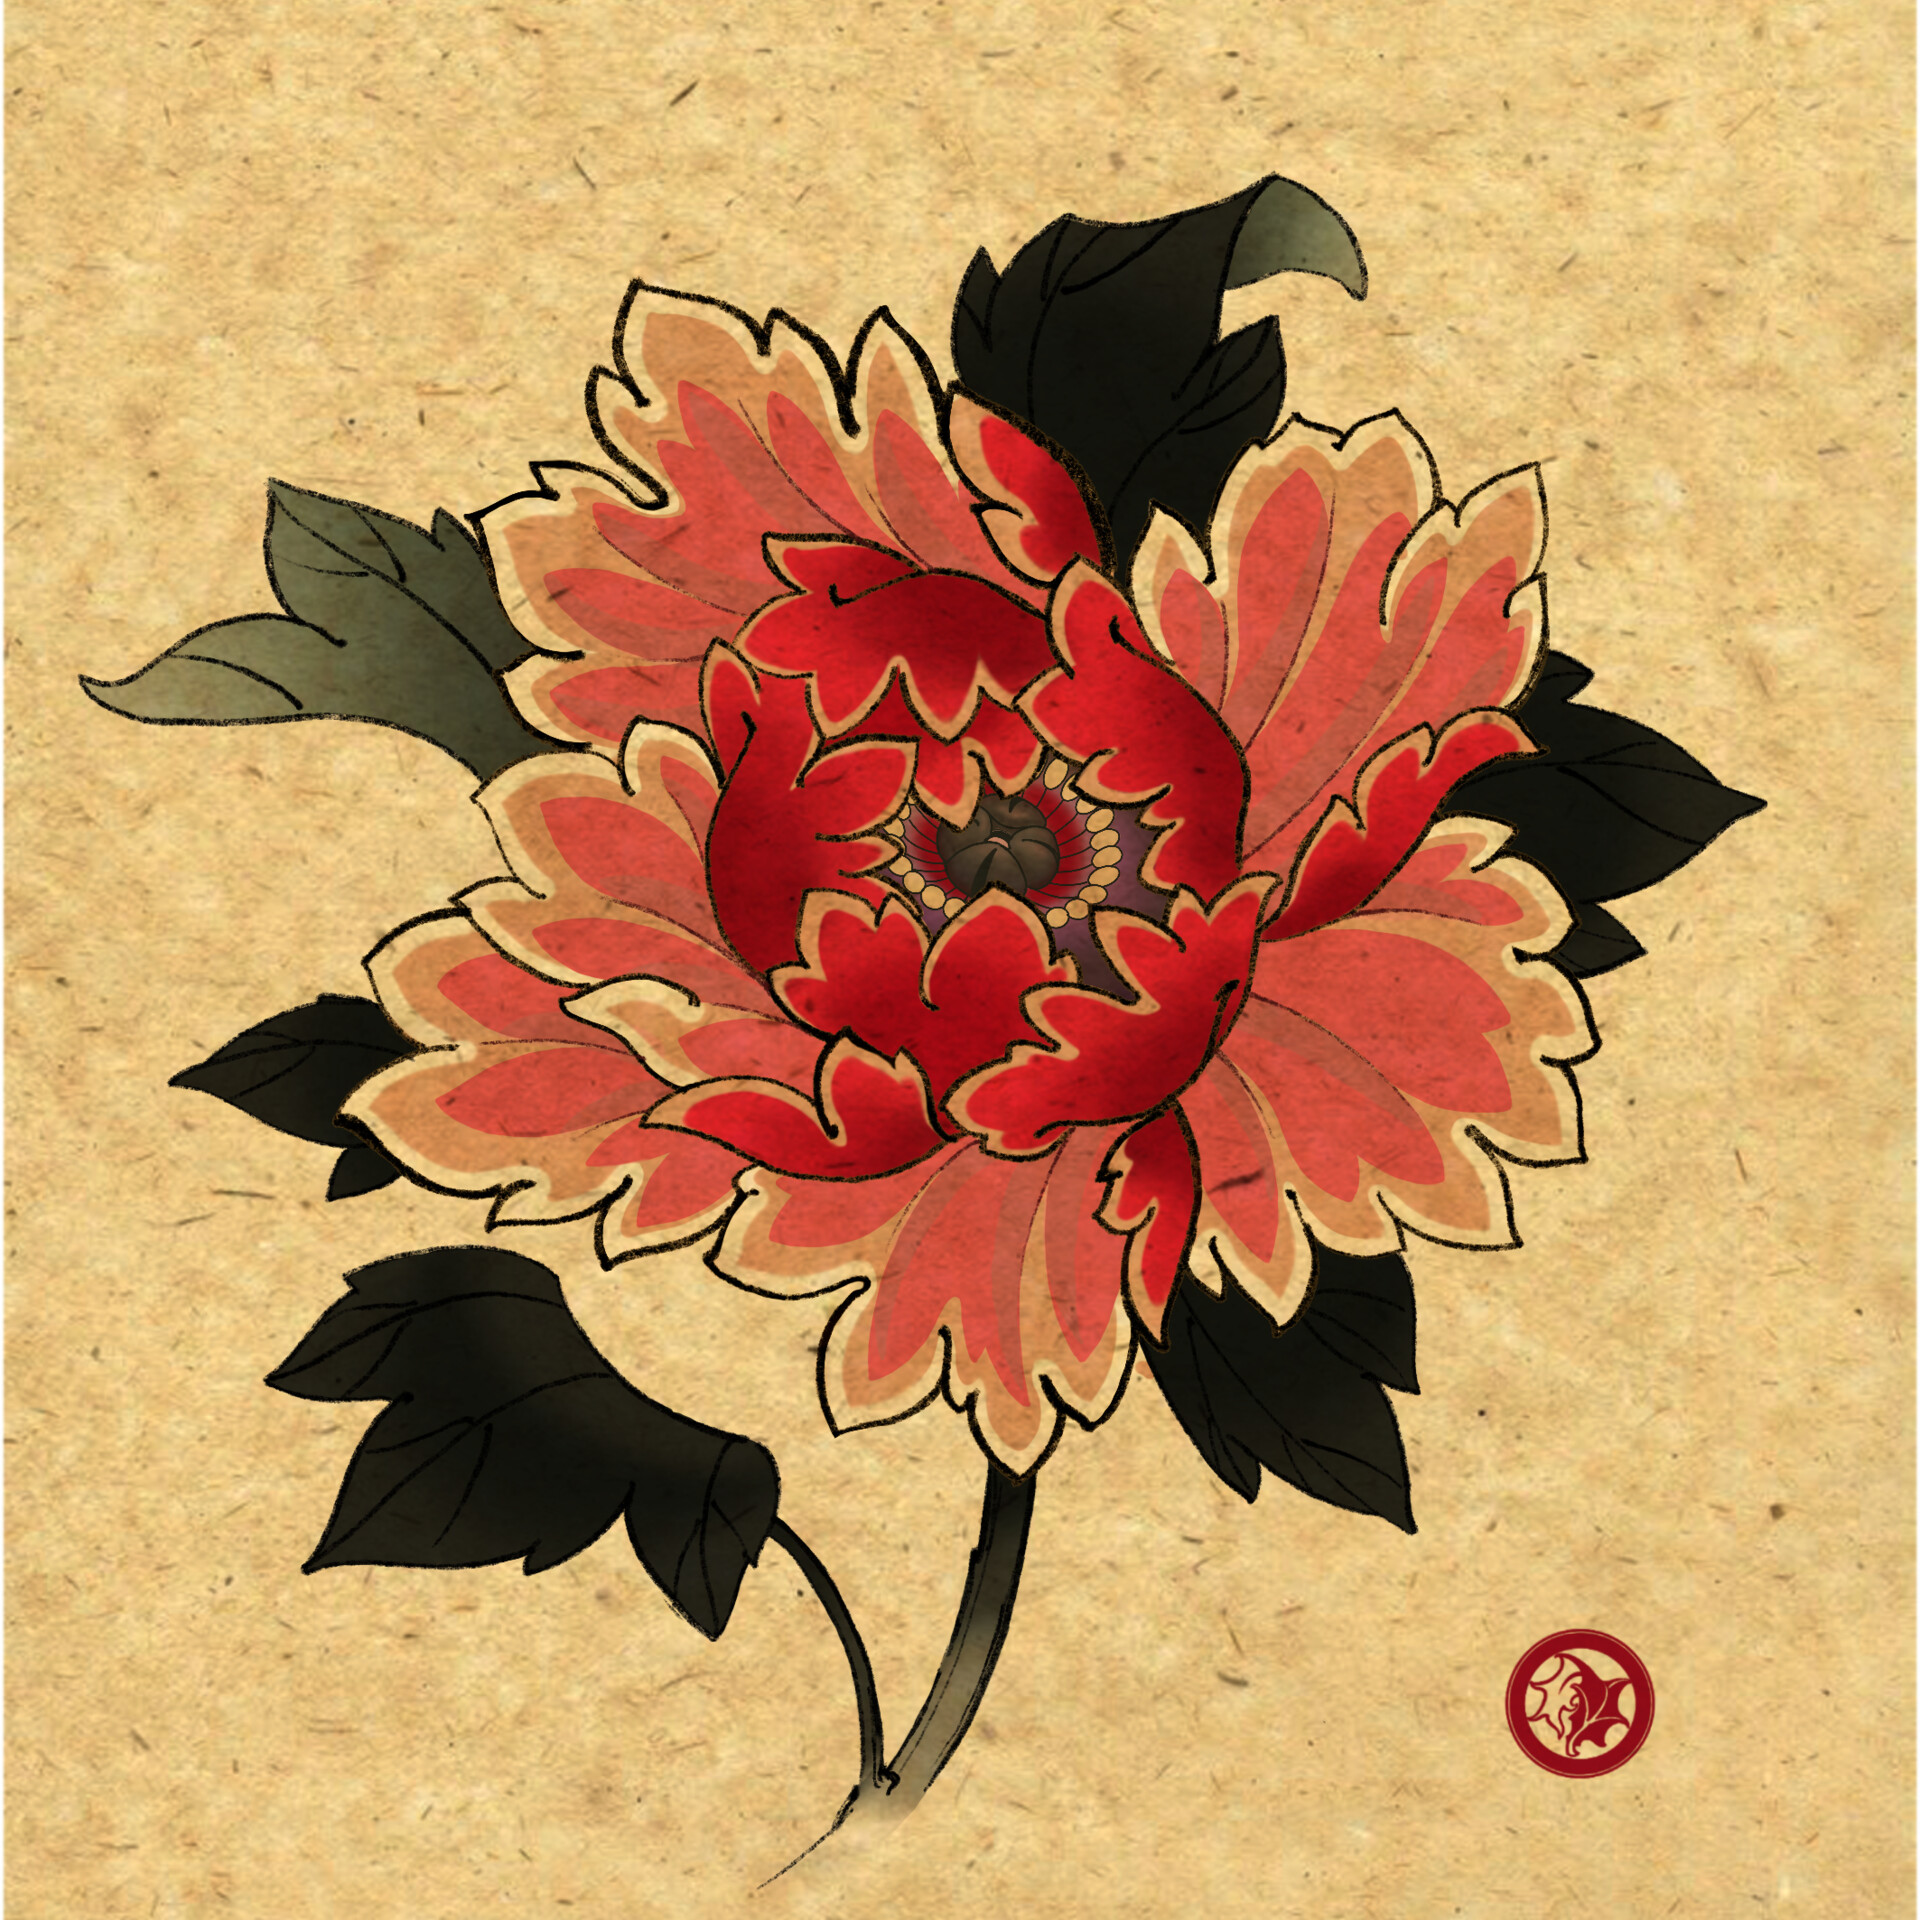 Peony flowers in japanese tattoo style Hand drawn red flowers Vector  illustration  Stock Image  Everypixel